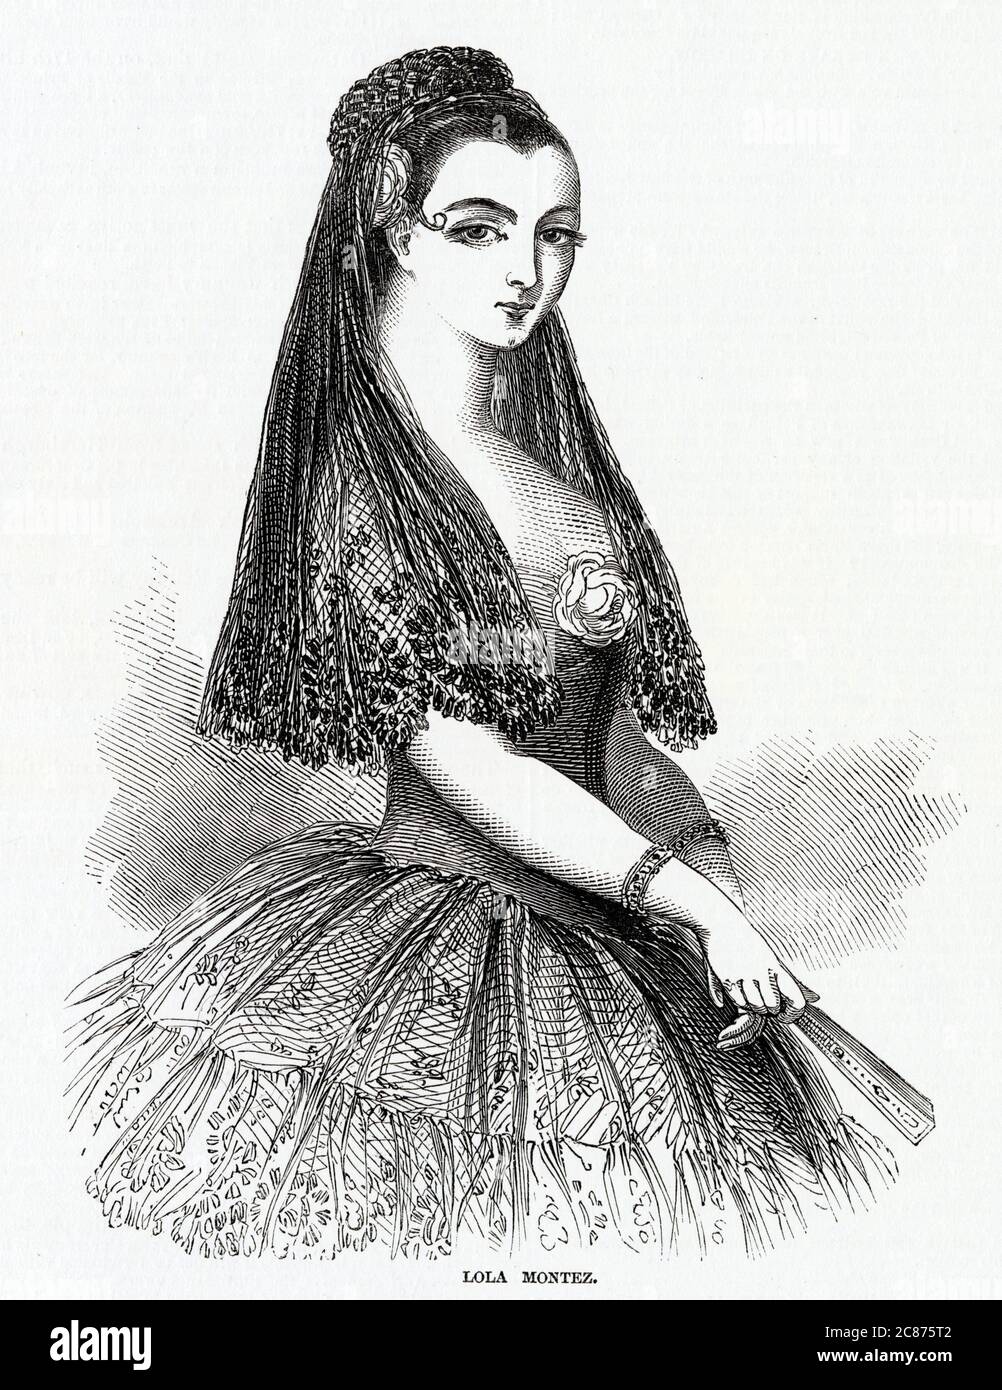 MARIA DOLORES ELIZA ROSEANNA GILBERT, known as LOLA MONTEZ (1818 - 1861), American dancer and adventuress, born in Ireland - seen here in traditional Spanish costume Stock Photo